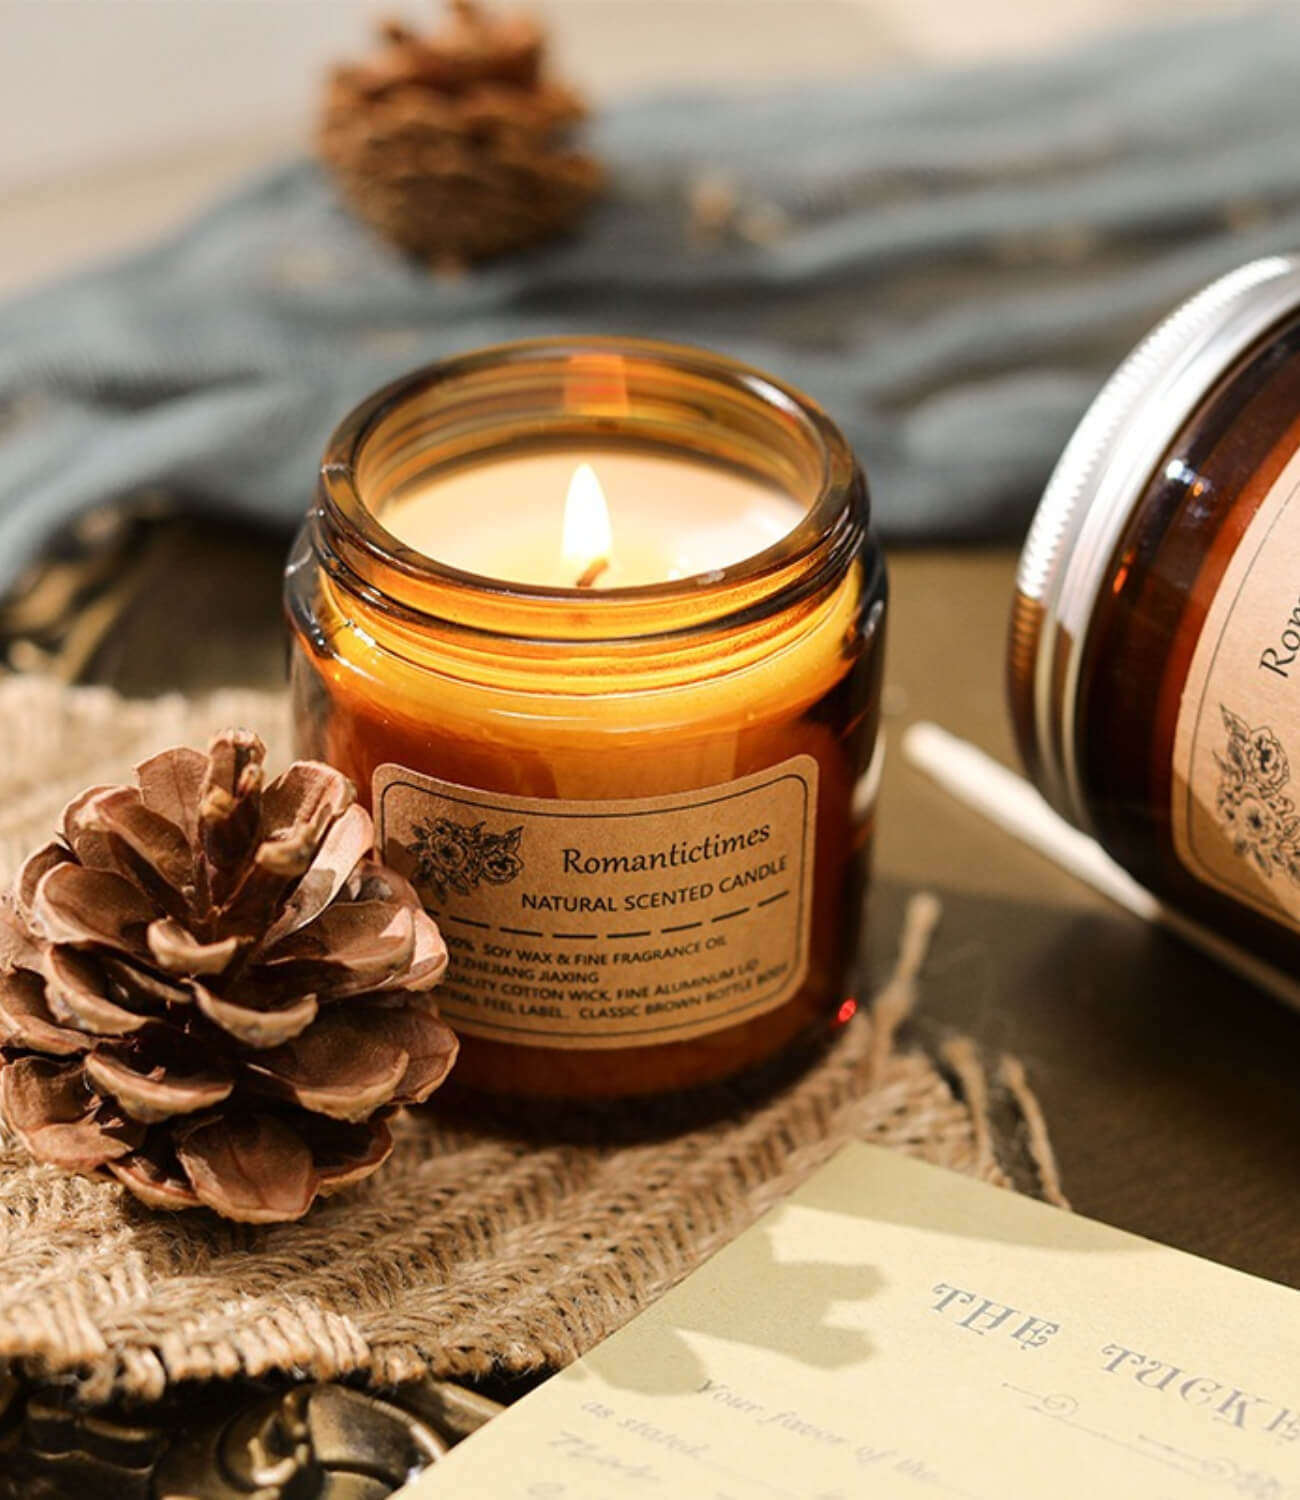 Aromatic ambiance created by a vintage-style scented candle, casting a warm glow in the room.